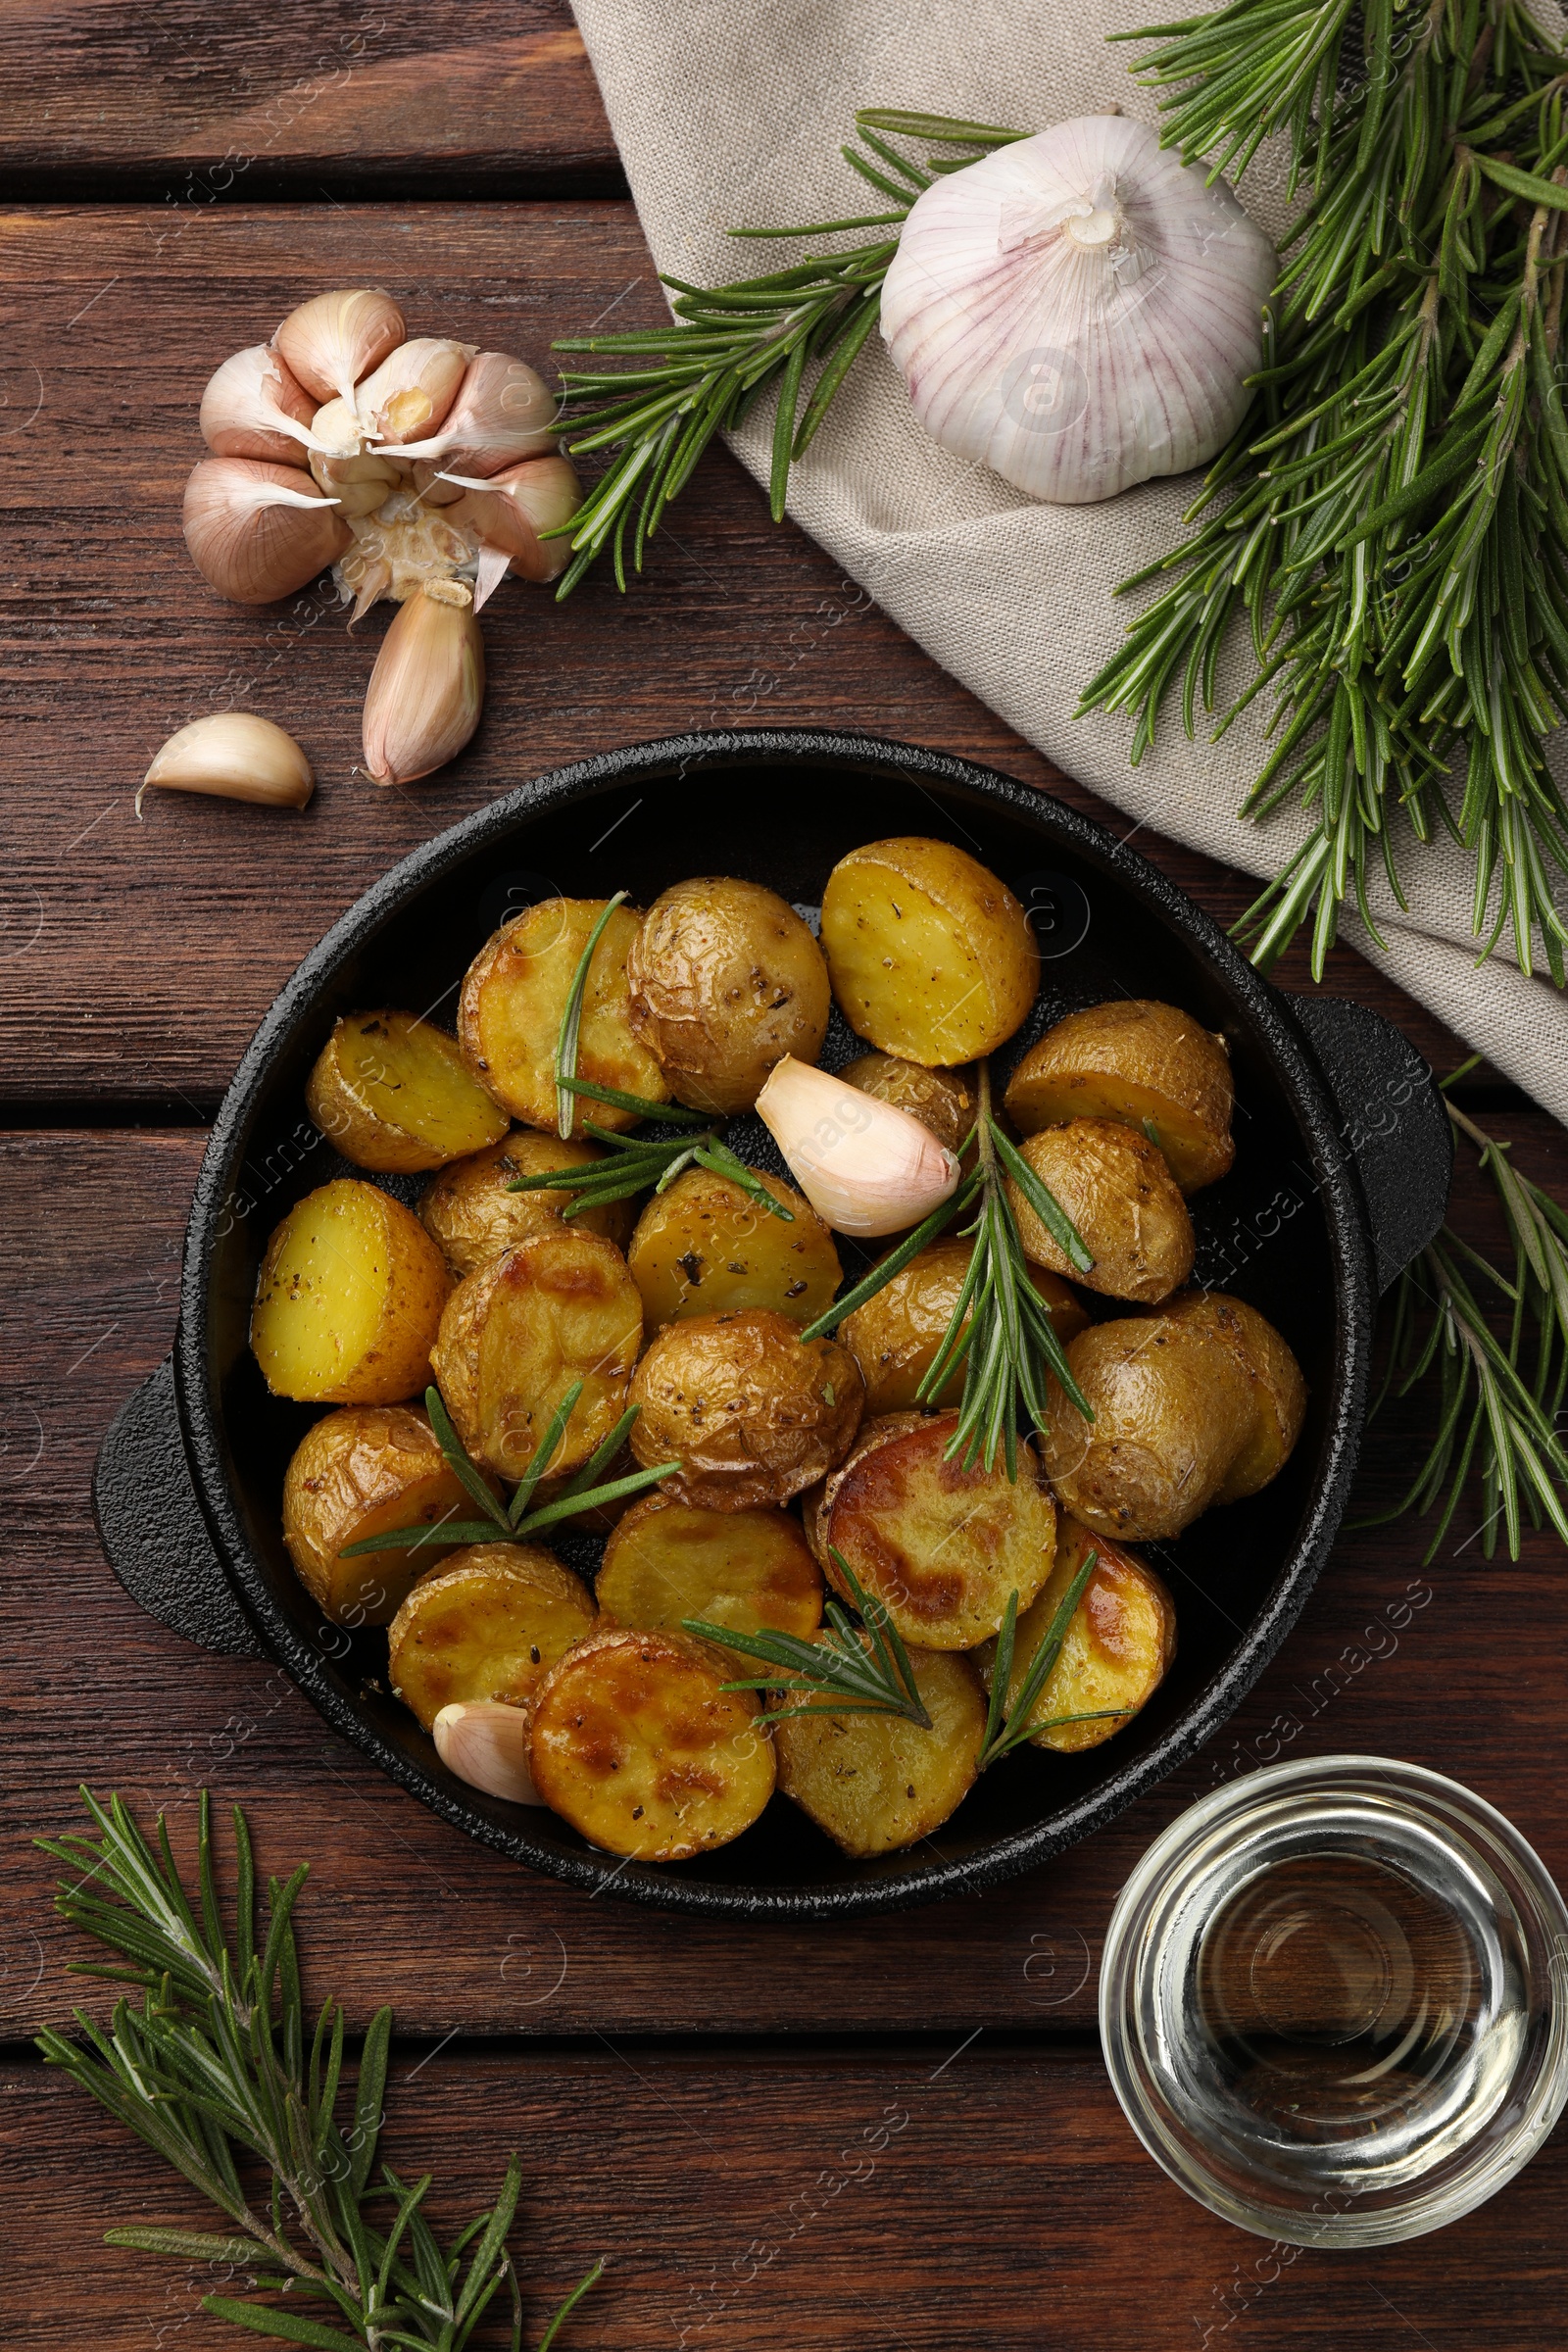 Photo of Delicious baked potatoes with rosemary and ingredients on wooden table, flat lay